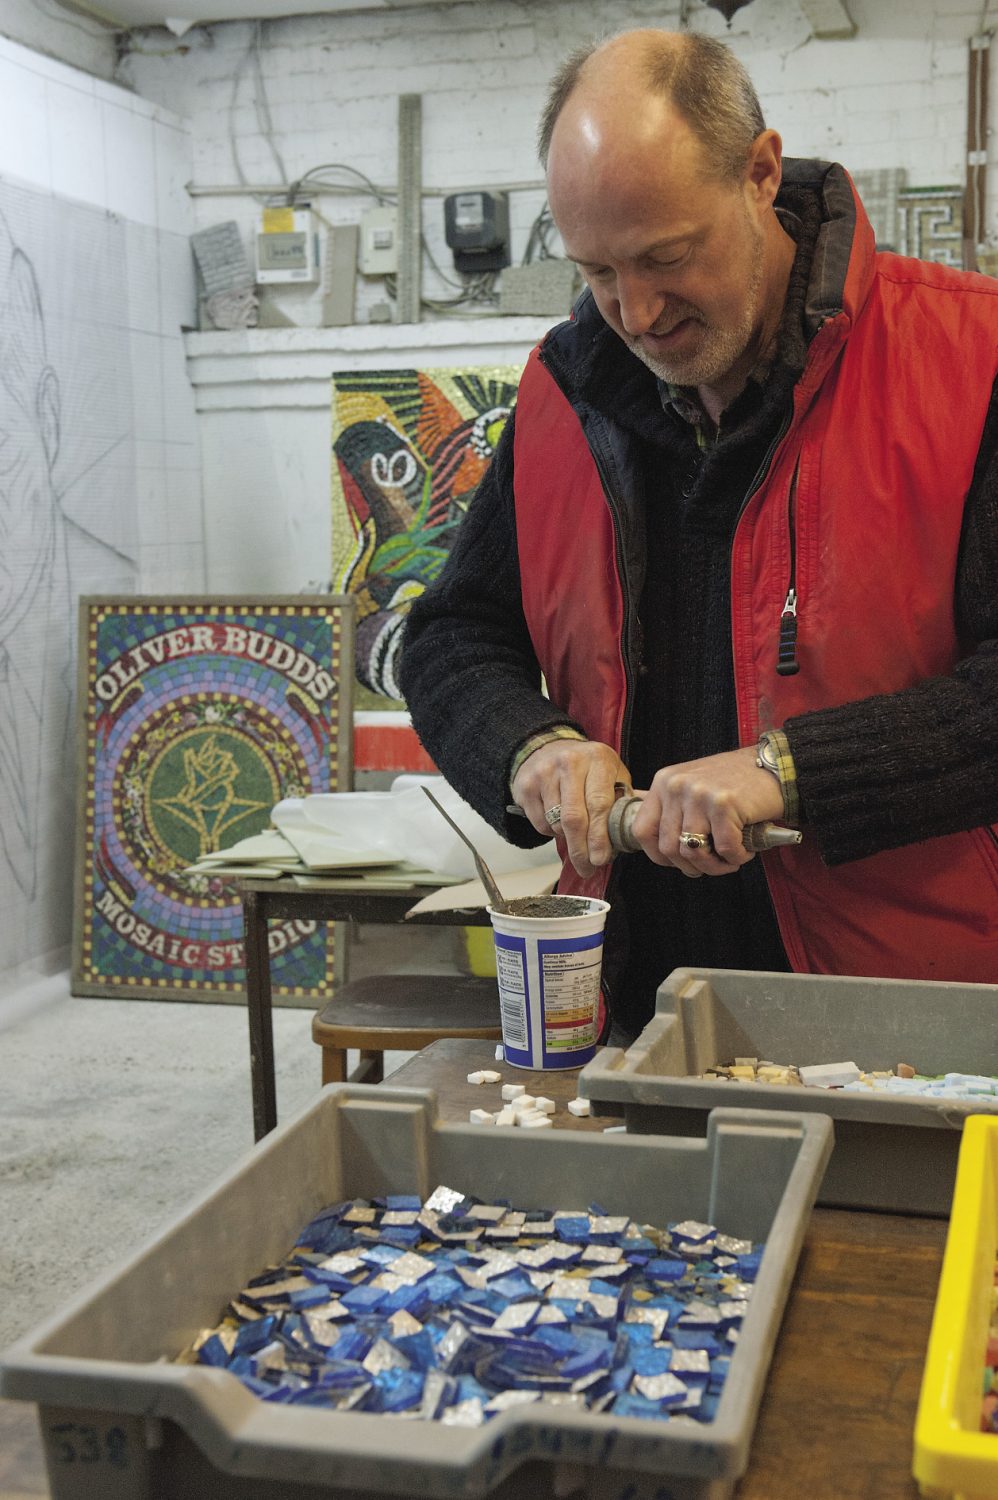 Oliver at work in his Bodiam-based studio. He is currently working on the restoration of the JF Kennedy memorial mosaic that was in Birmingham. Commissioned by the city’s Irish Catholic community some time after Kennedy’s assassination in ’63, is was originally unveiled by his father in 1969